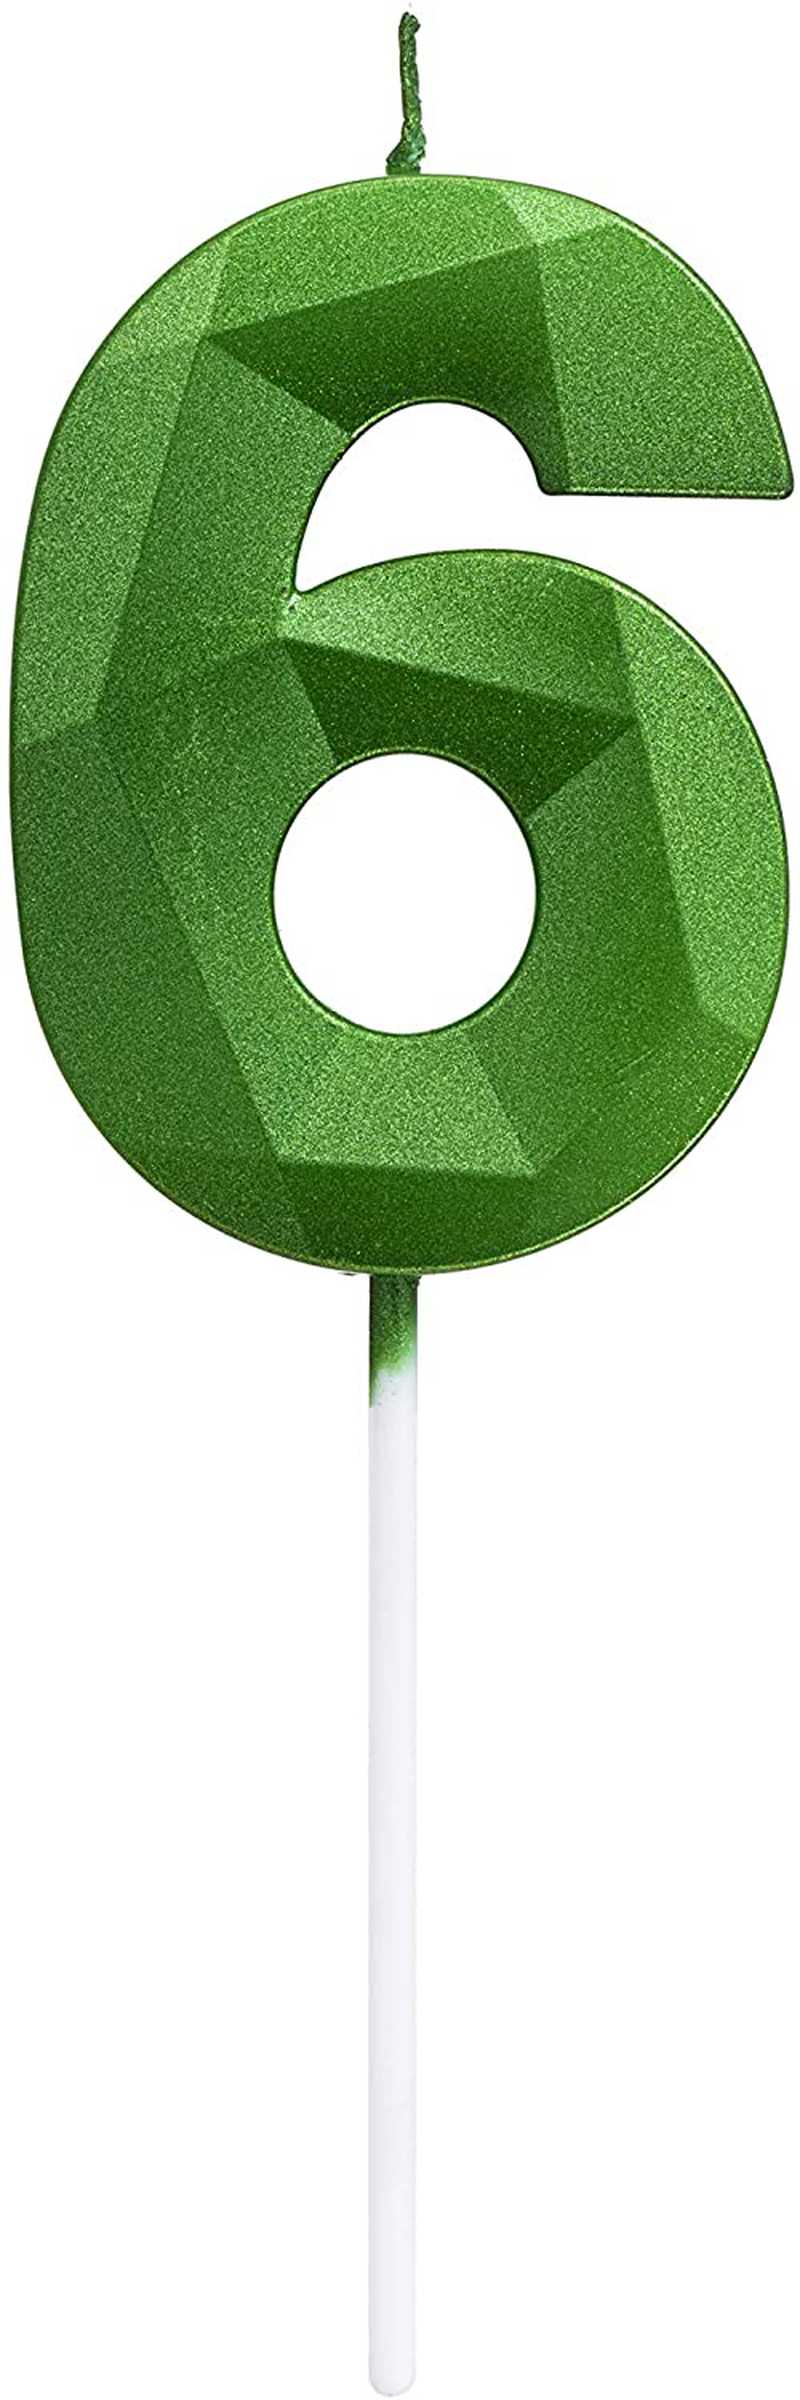 Green Happy Birthday Cake Candles,Wedding Cake Number Candles,3D Design Cake Topper Decoration for Party Kids Adults (Green Number 6) Home & Garden > Decor > Seasonal & Holiday Decorations& Garden > Decor > Seasonal & Holiday Decorations MEIMEI Green number 6 